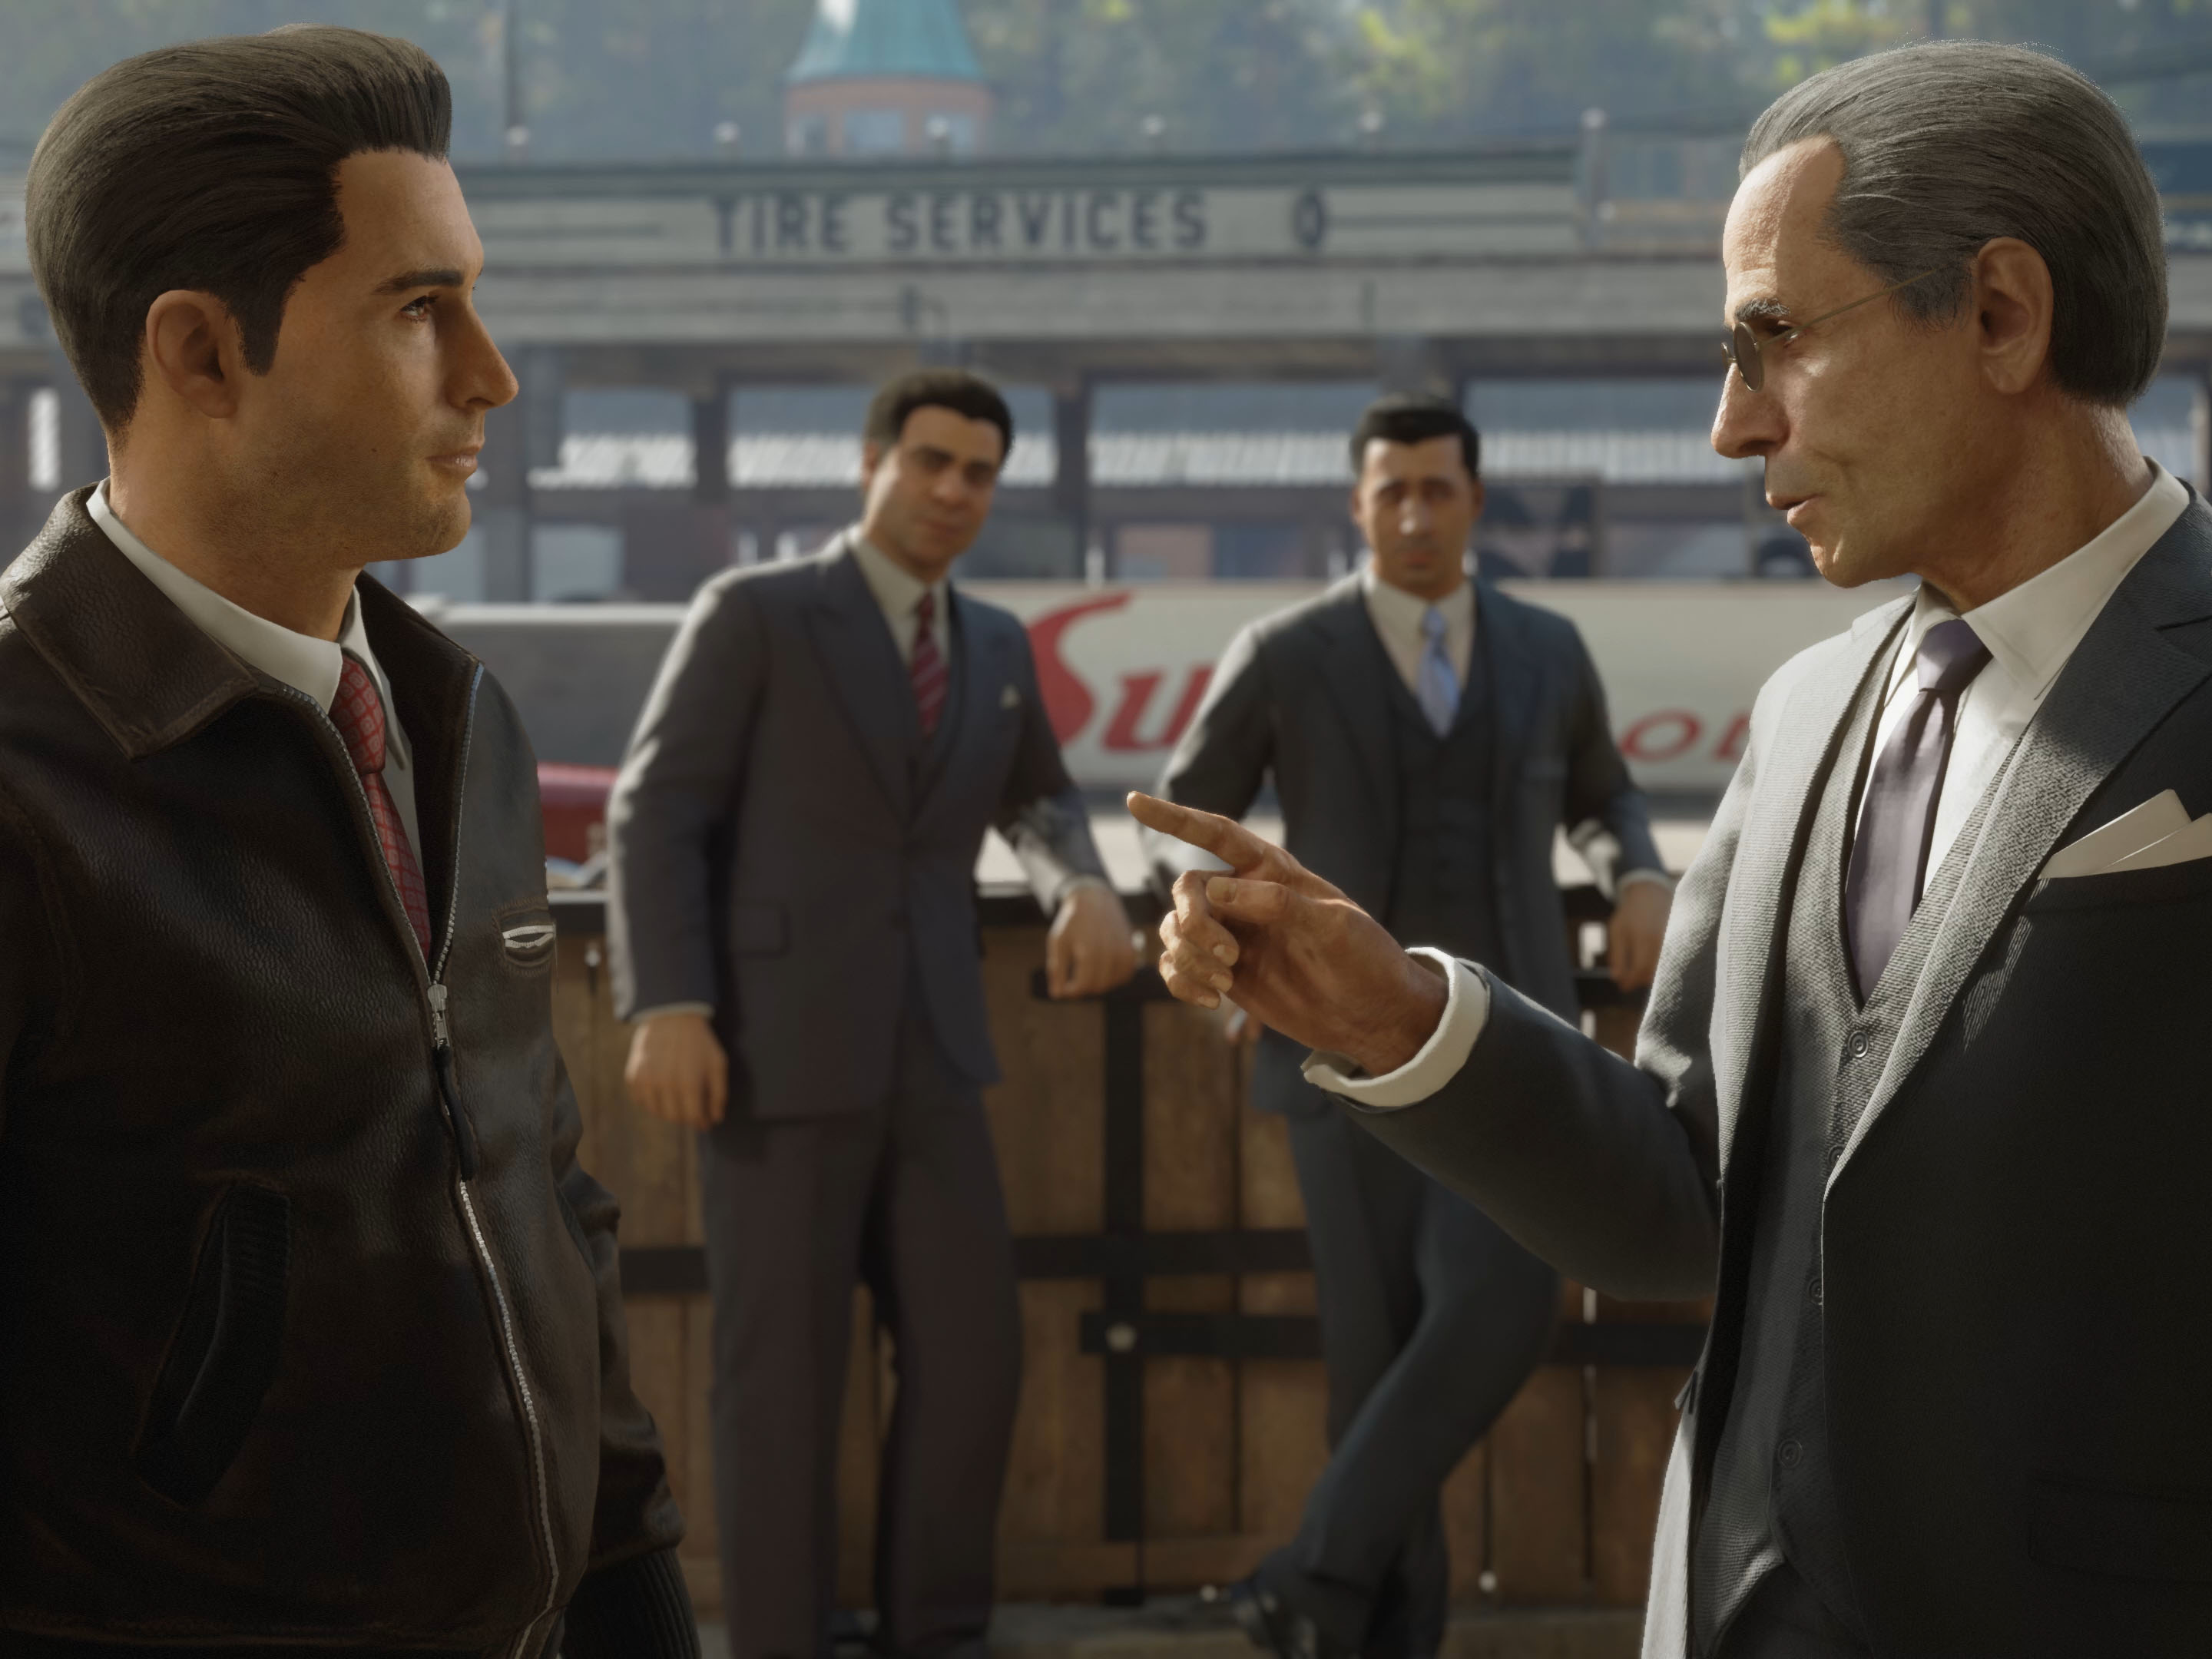 Mafia: Definitive Edition is a gorgeous remake of the original